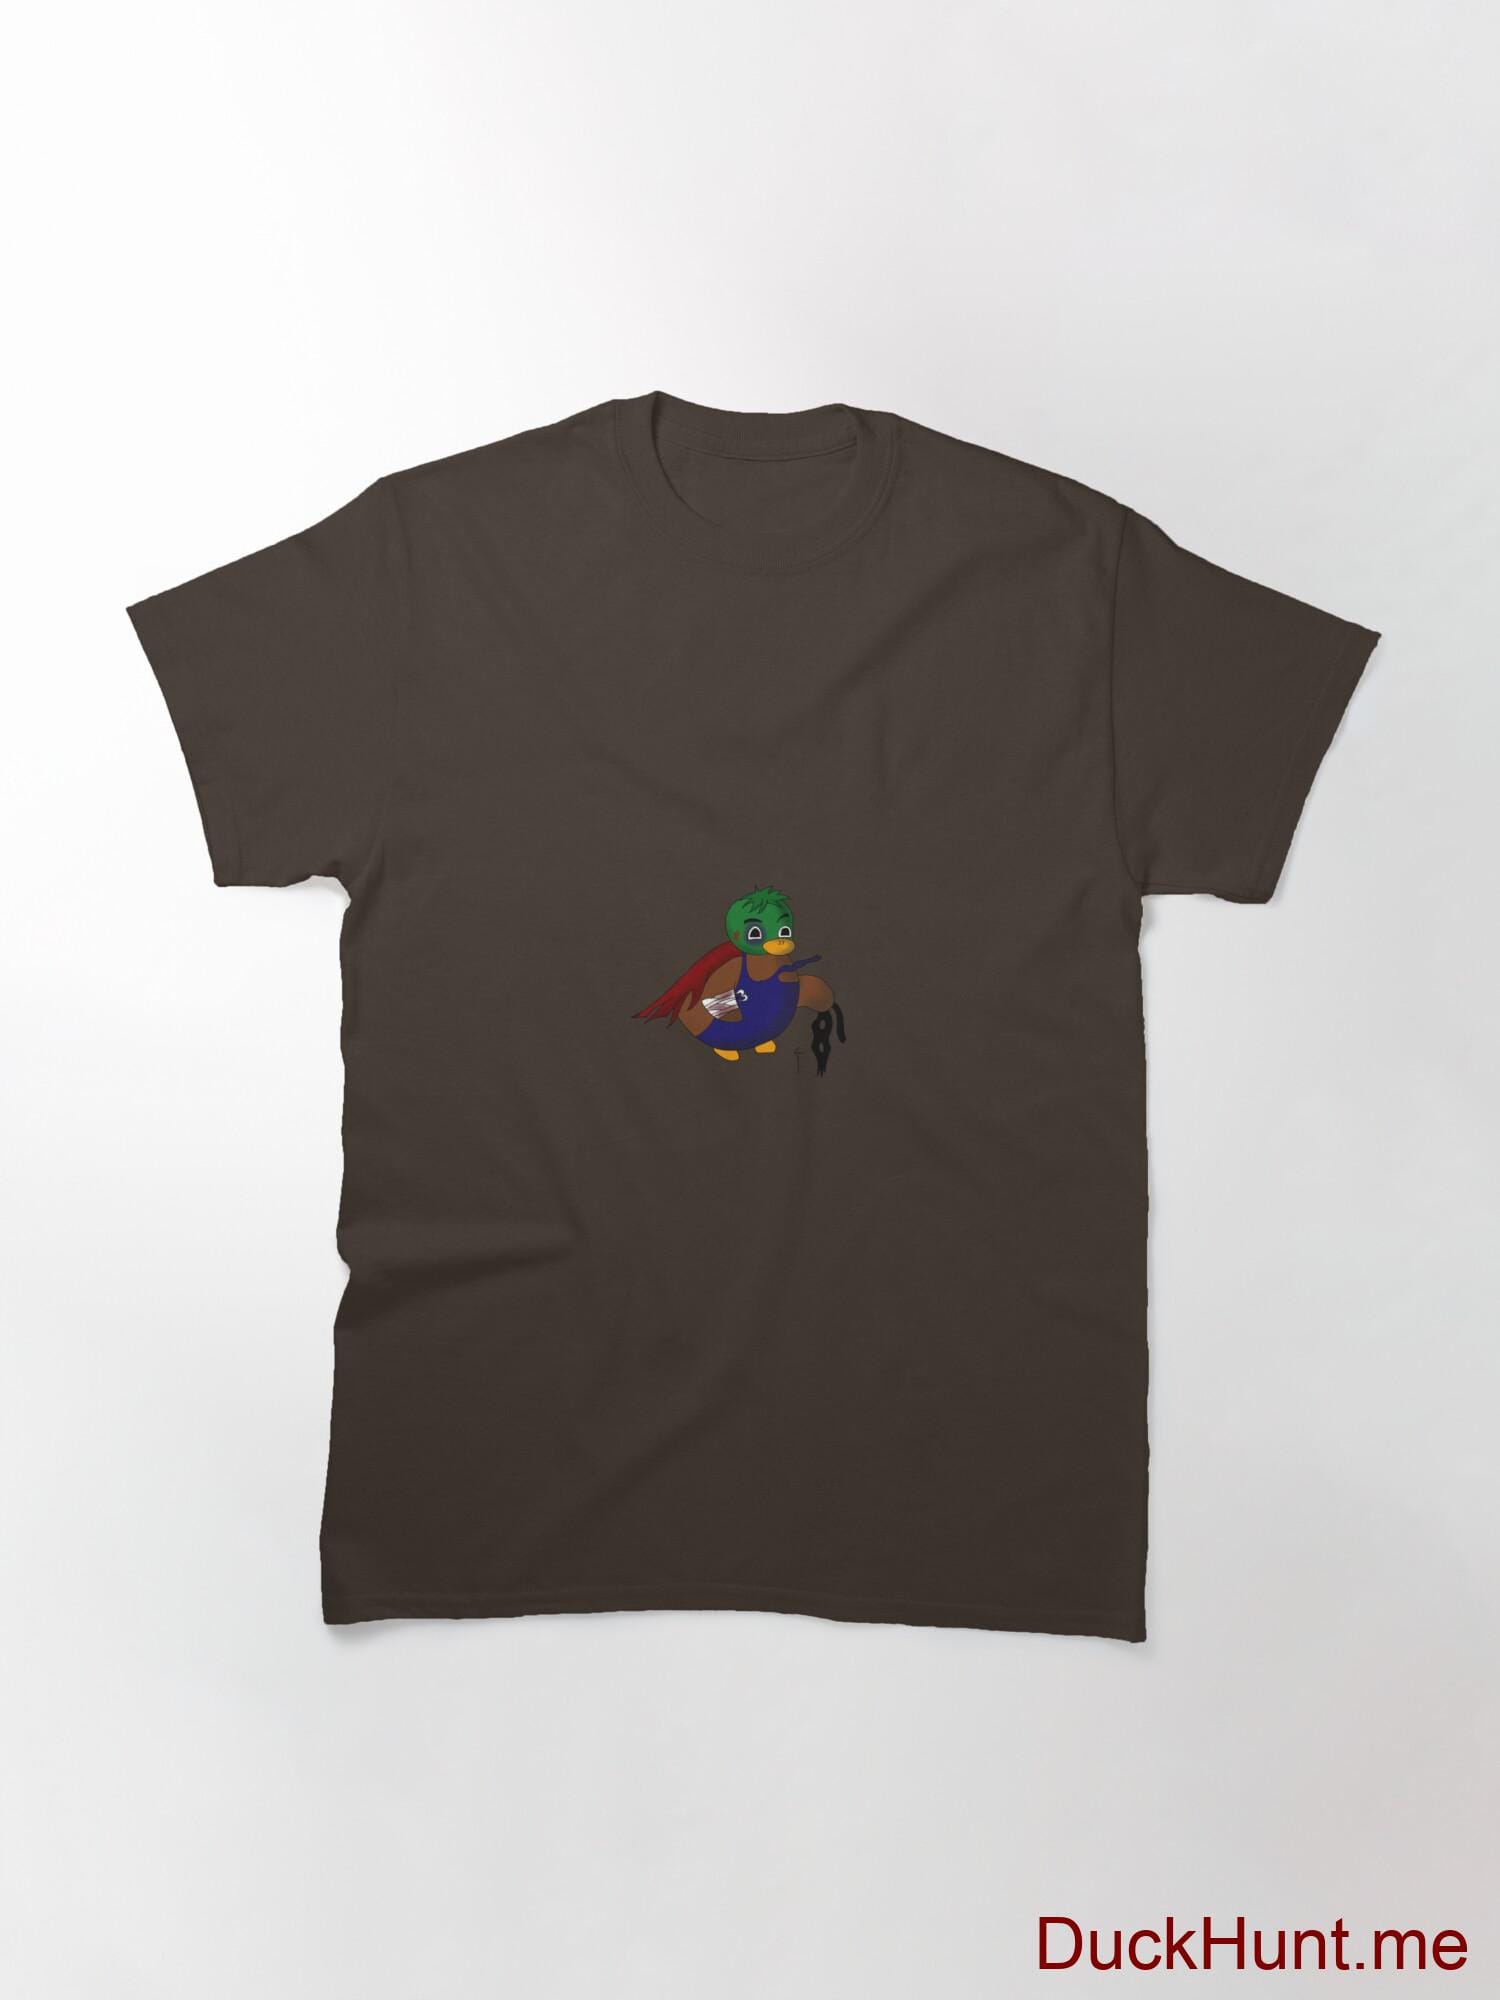 Dead DuckHunt Boss (smokeless) Brown Classic T-Shirt (Front printed) alternative image 2